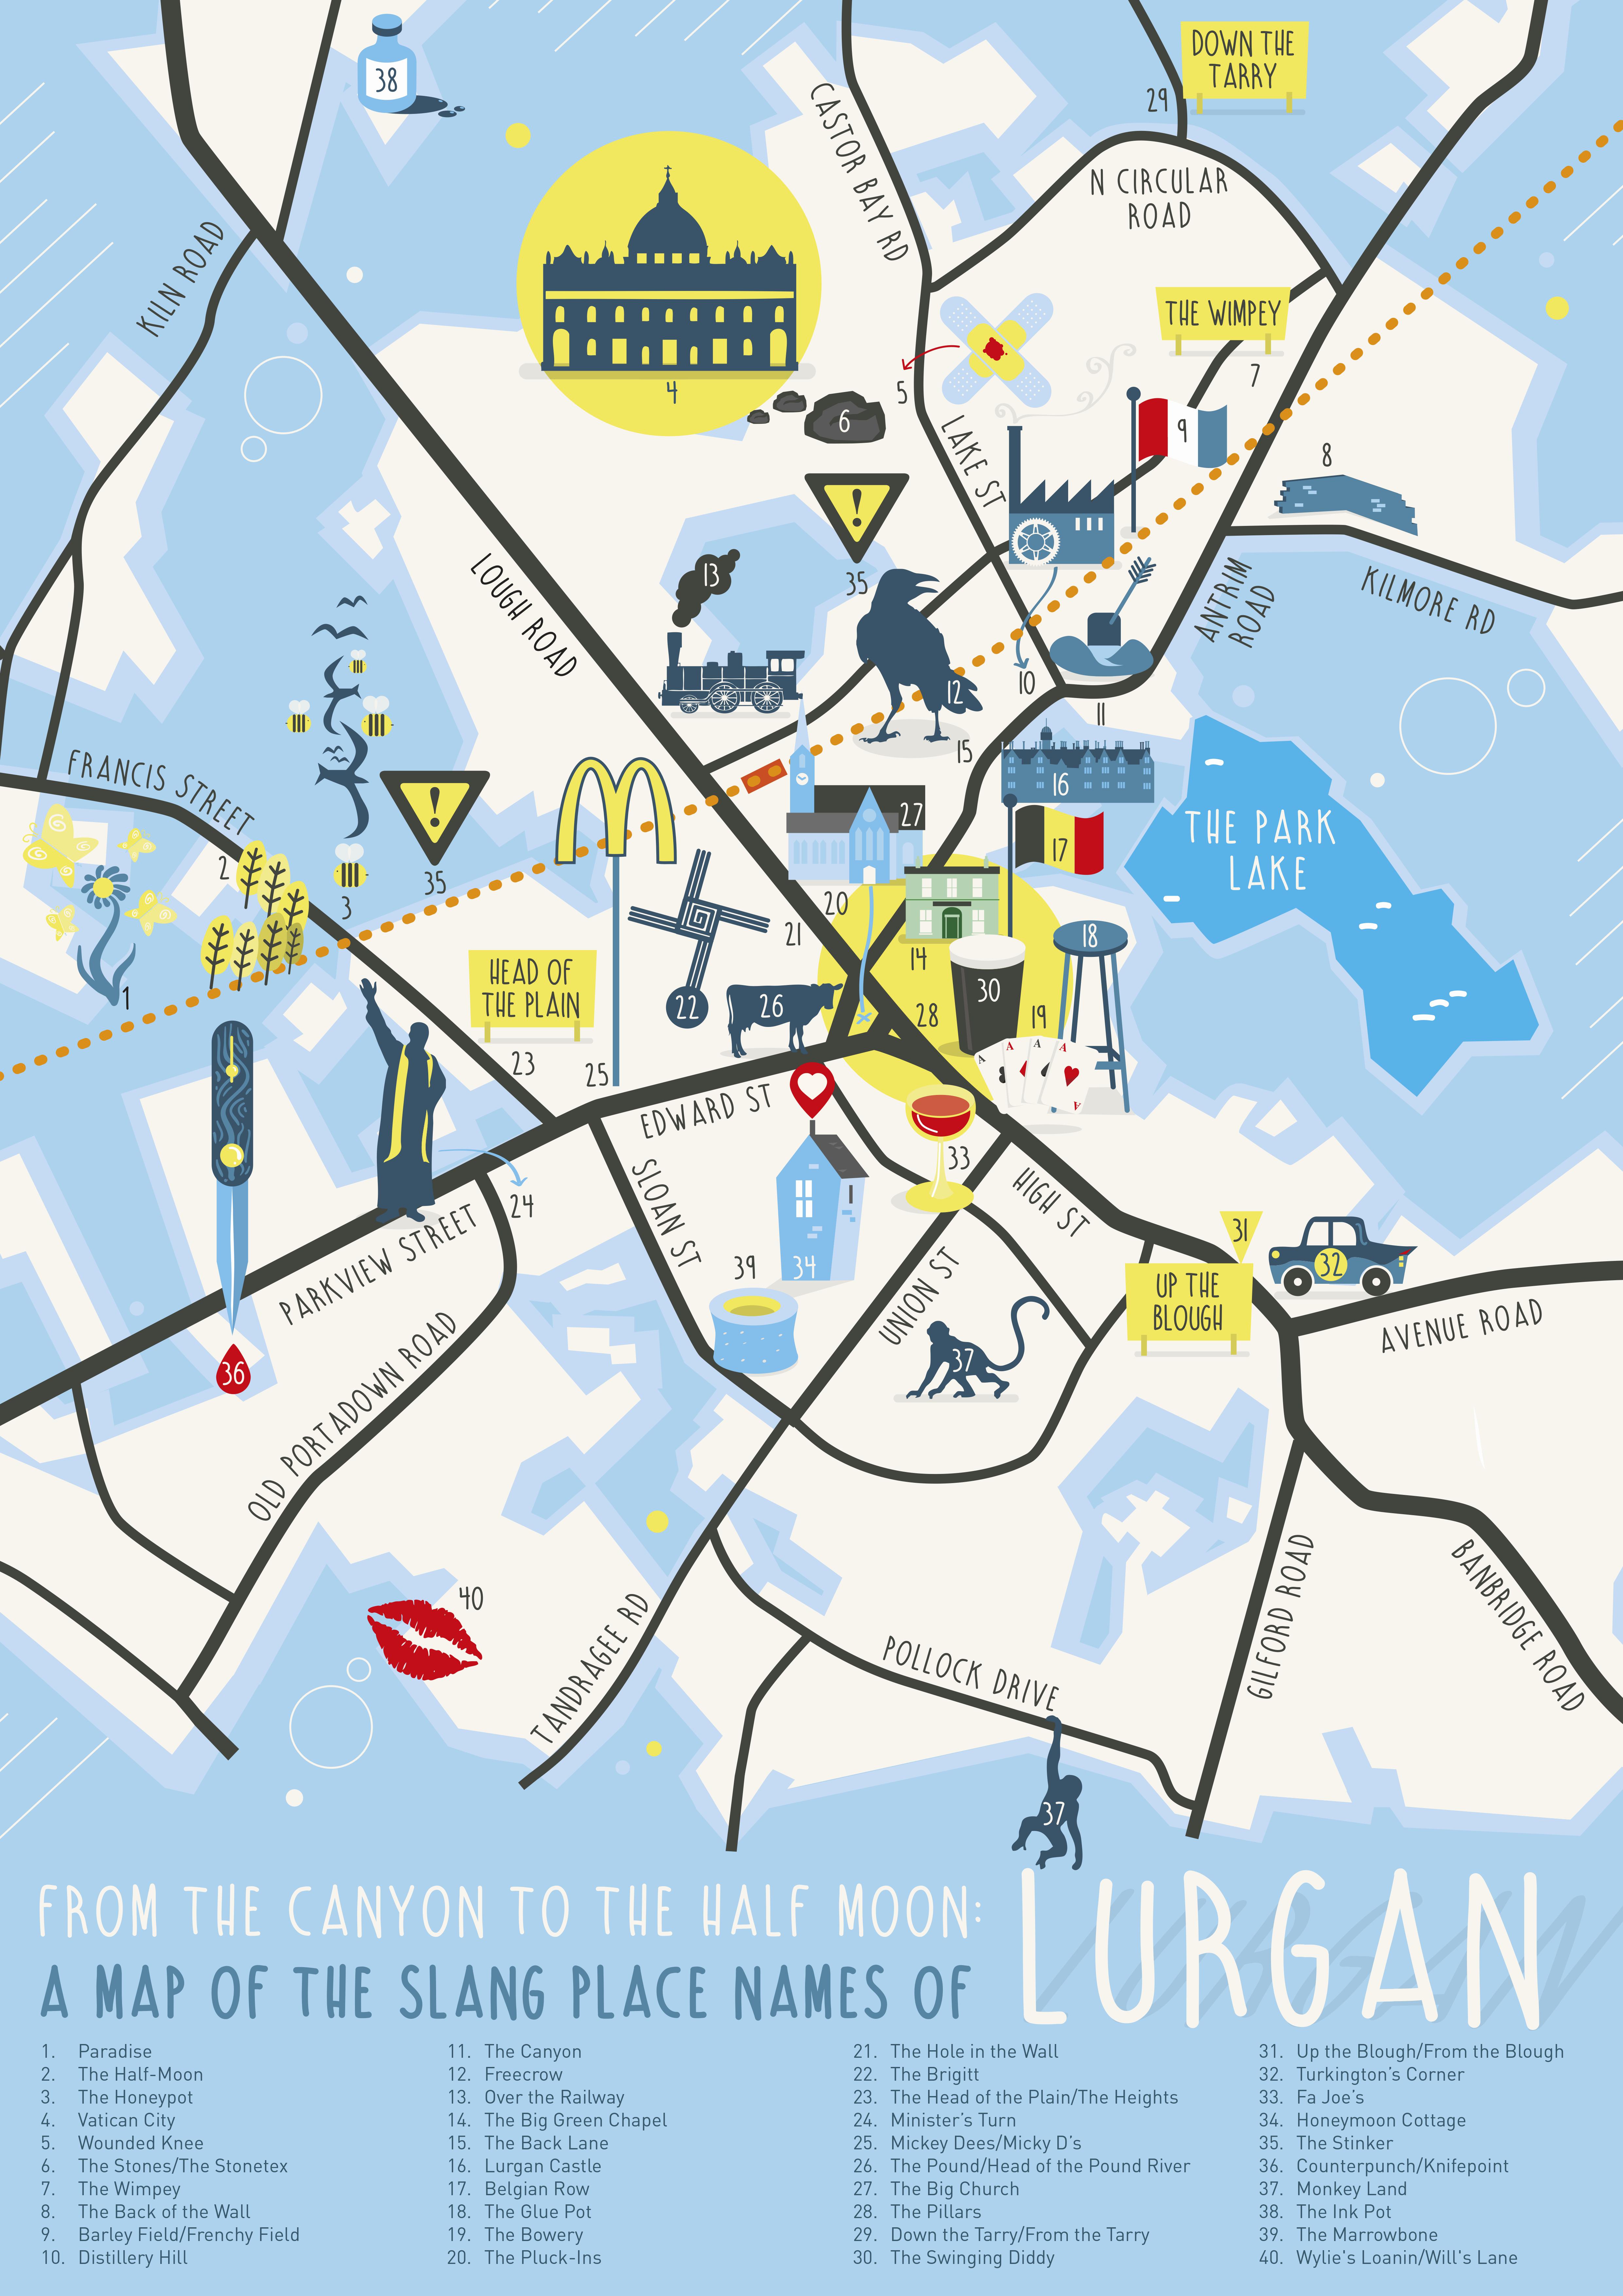 MAP OF THE SLANG PLACE NAMES OF LURGAN LAUNCHED